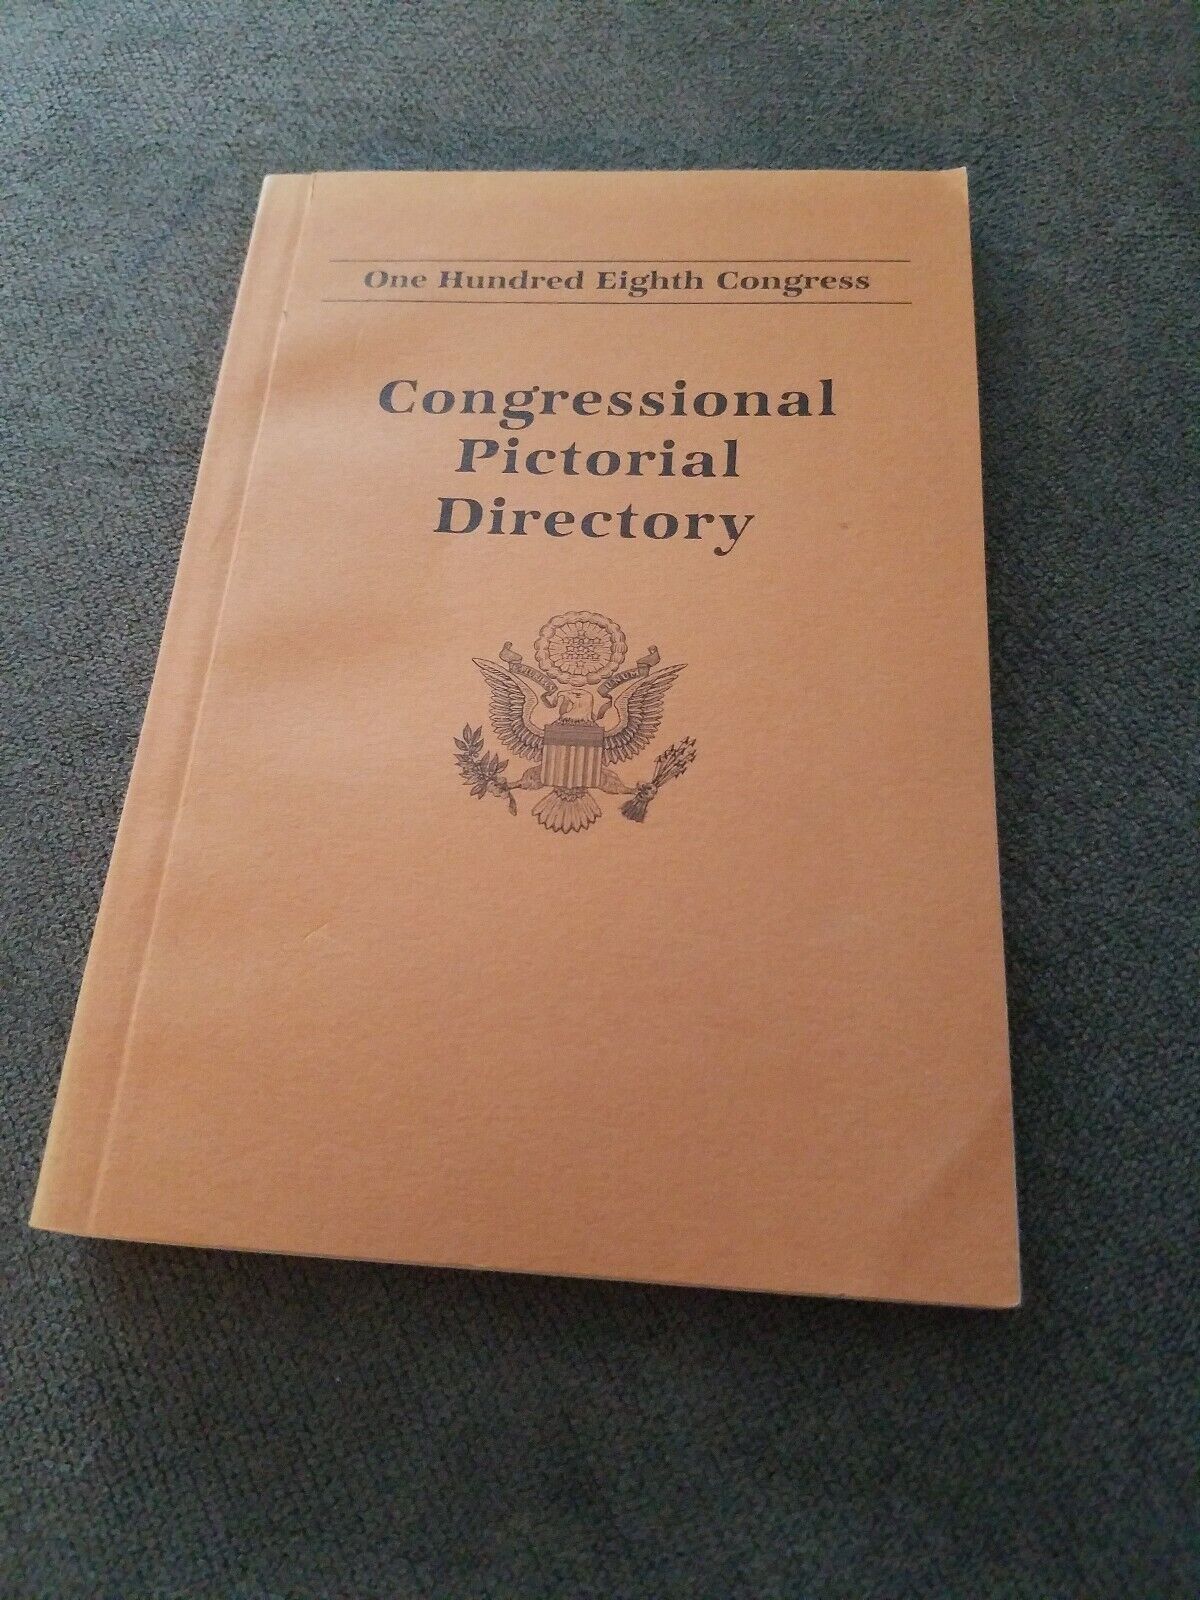 Congressional Pictorial Directory 108th Congress 